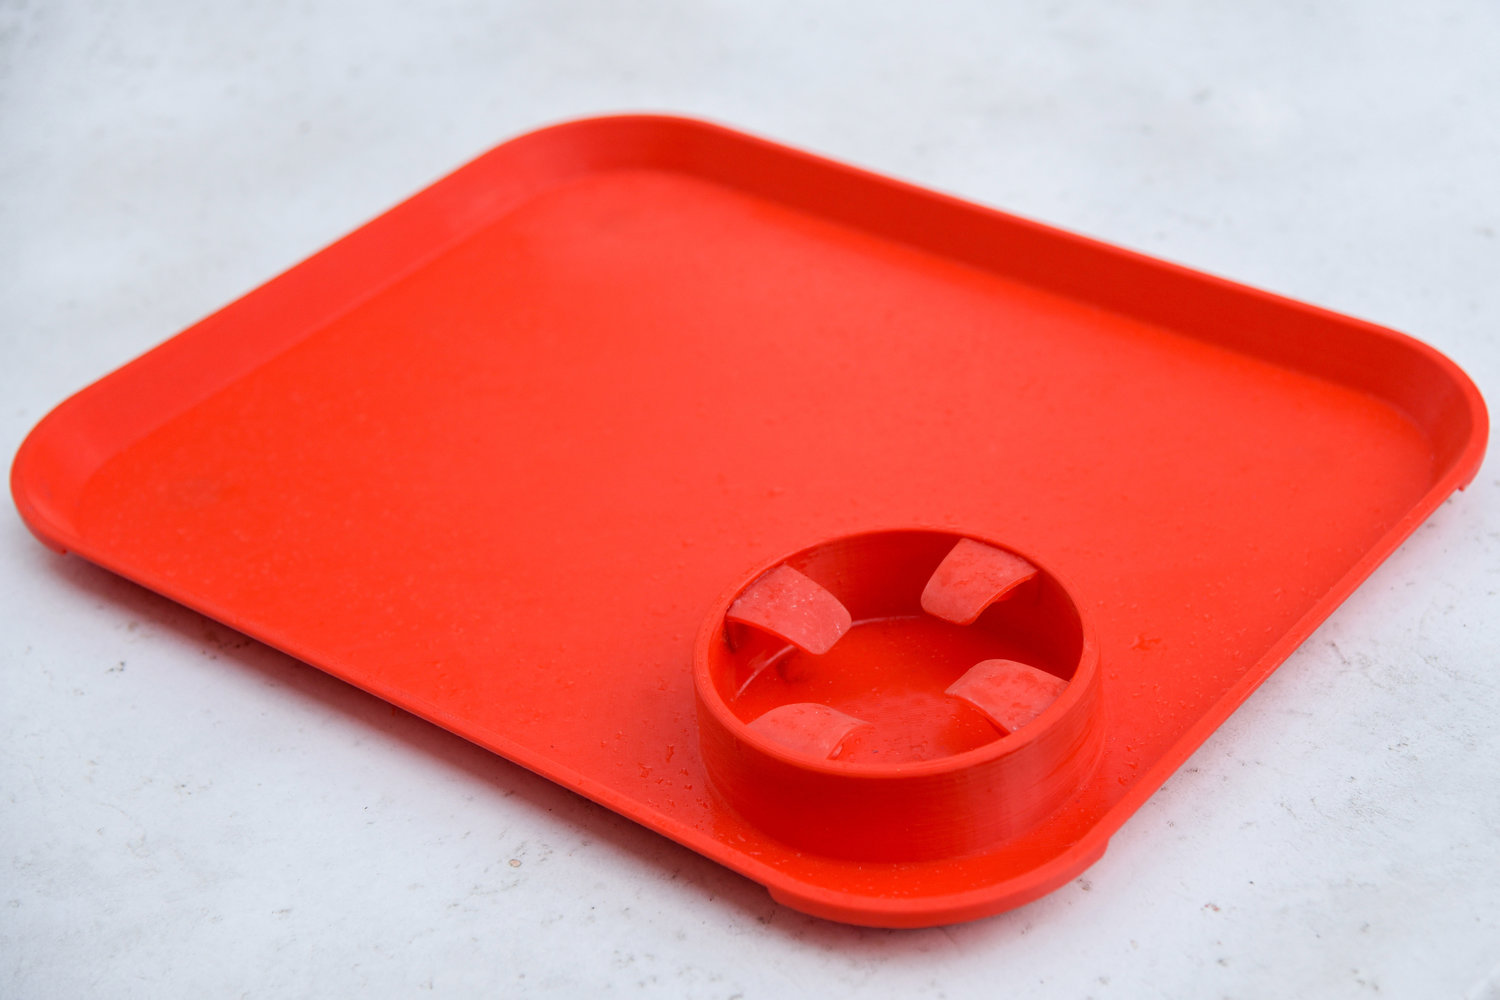 The independent feeding tray prototype features a molded cup with four flaps, intended to help stabilize the tray for those suffering from neurological conditions.